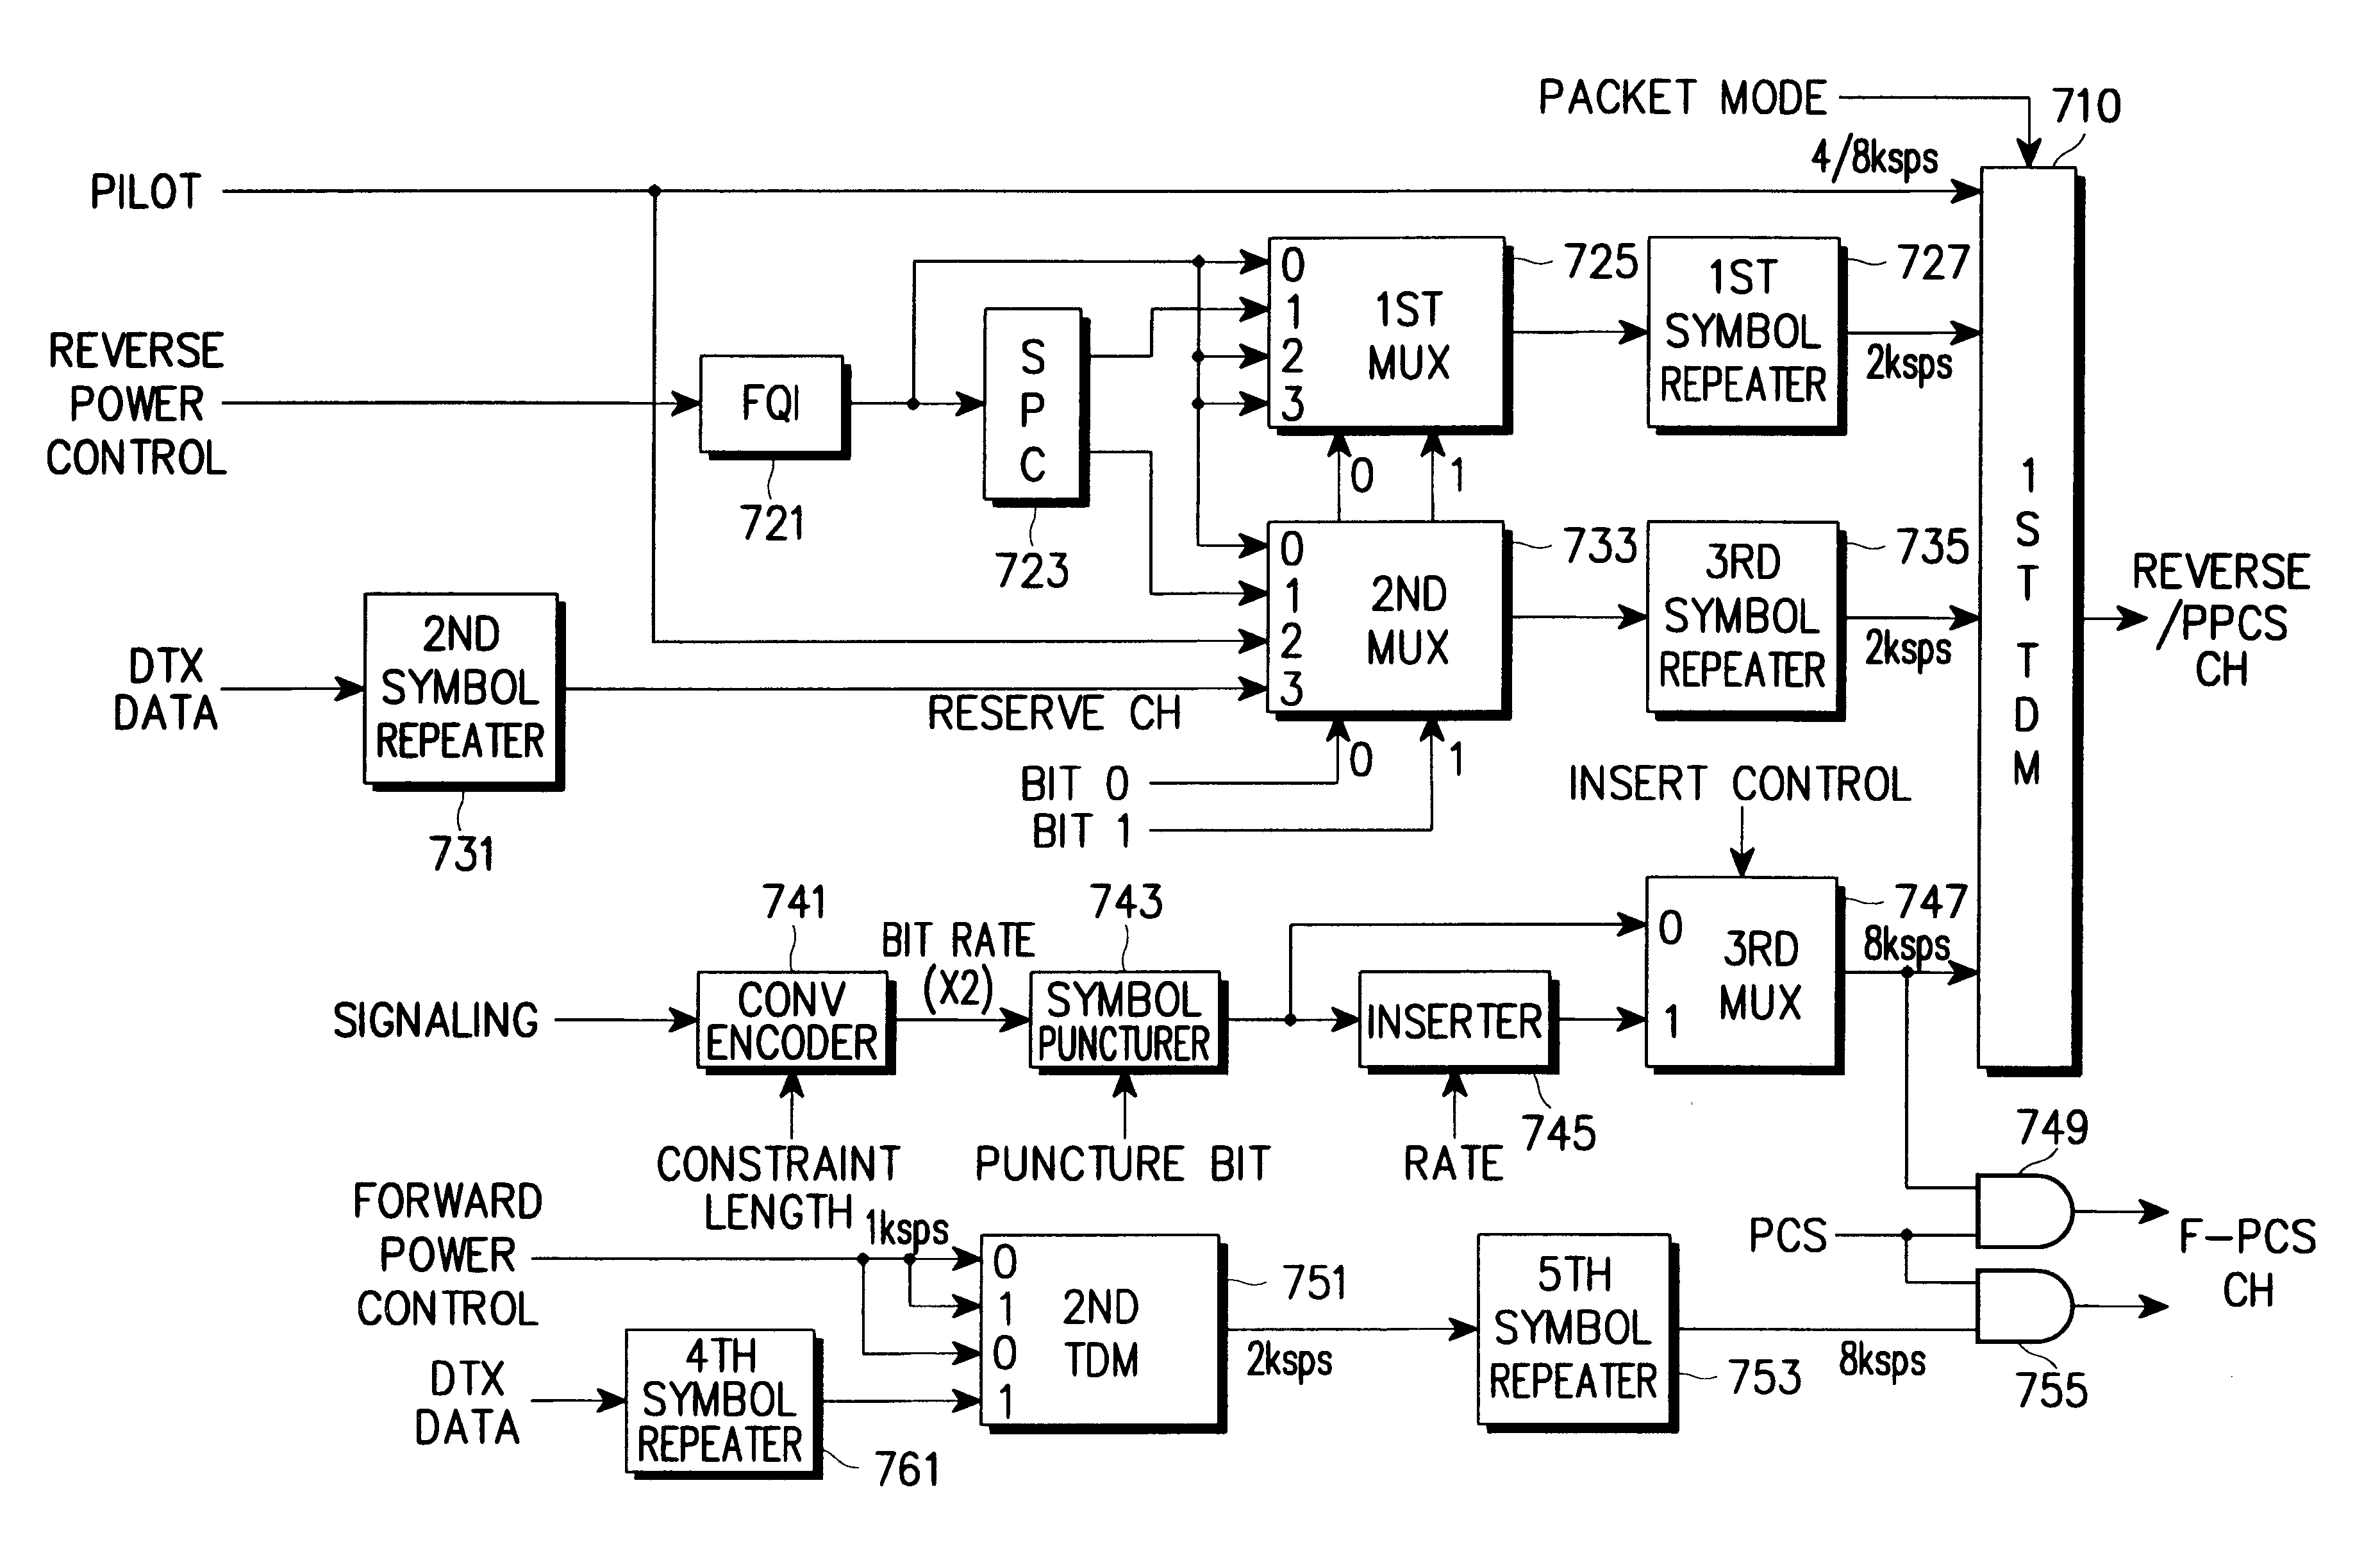 Variable channel device for wideband CDMA system